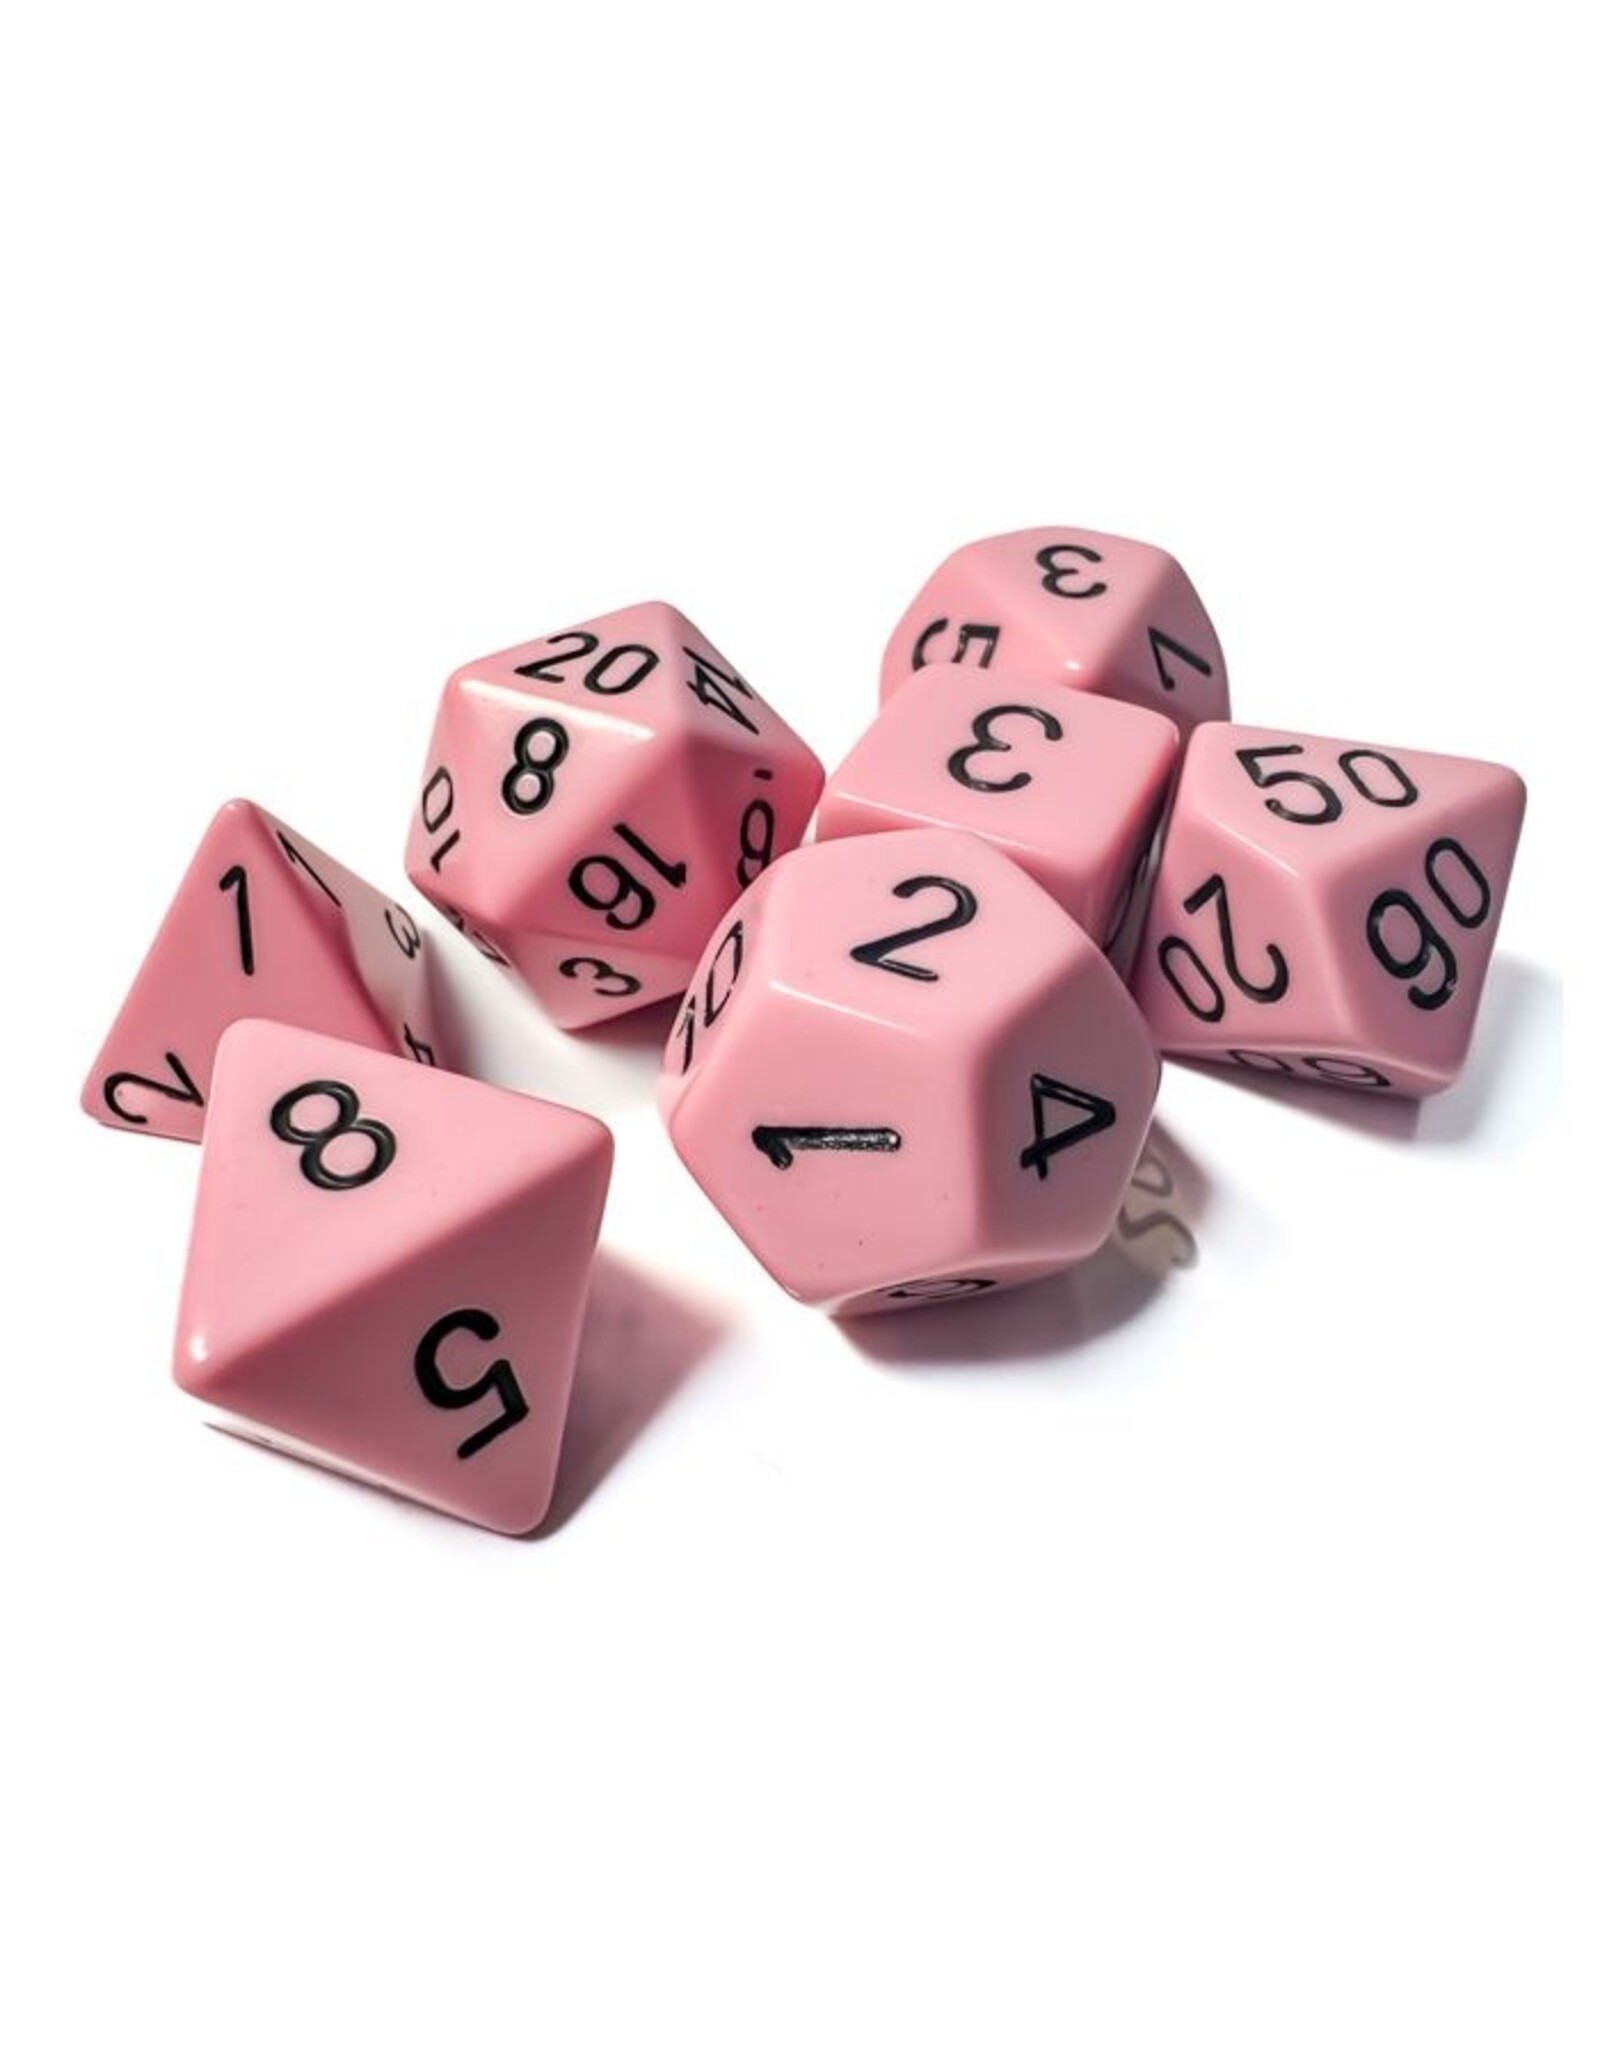 Chessex 7-set Opaque Polyhedral Pastel Pink/black (Pre Order)